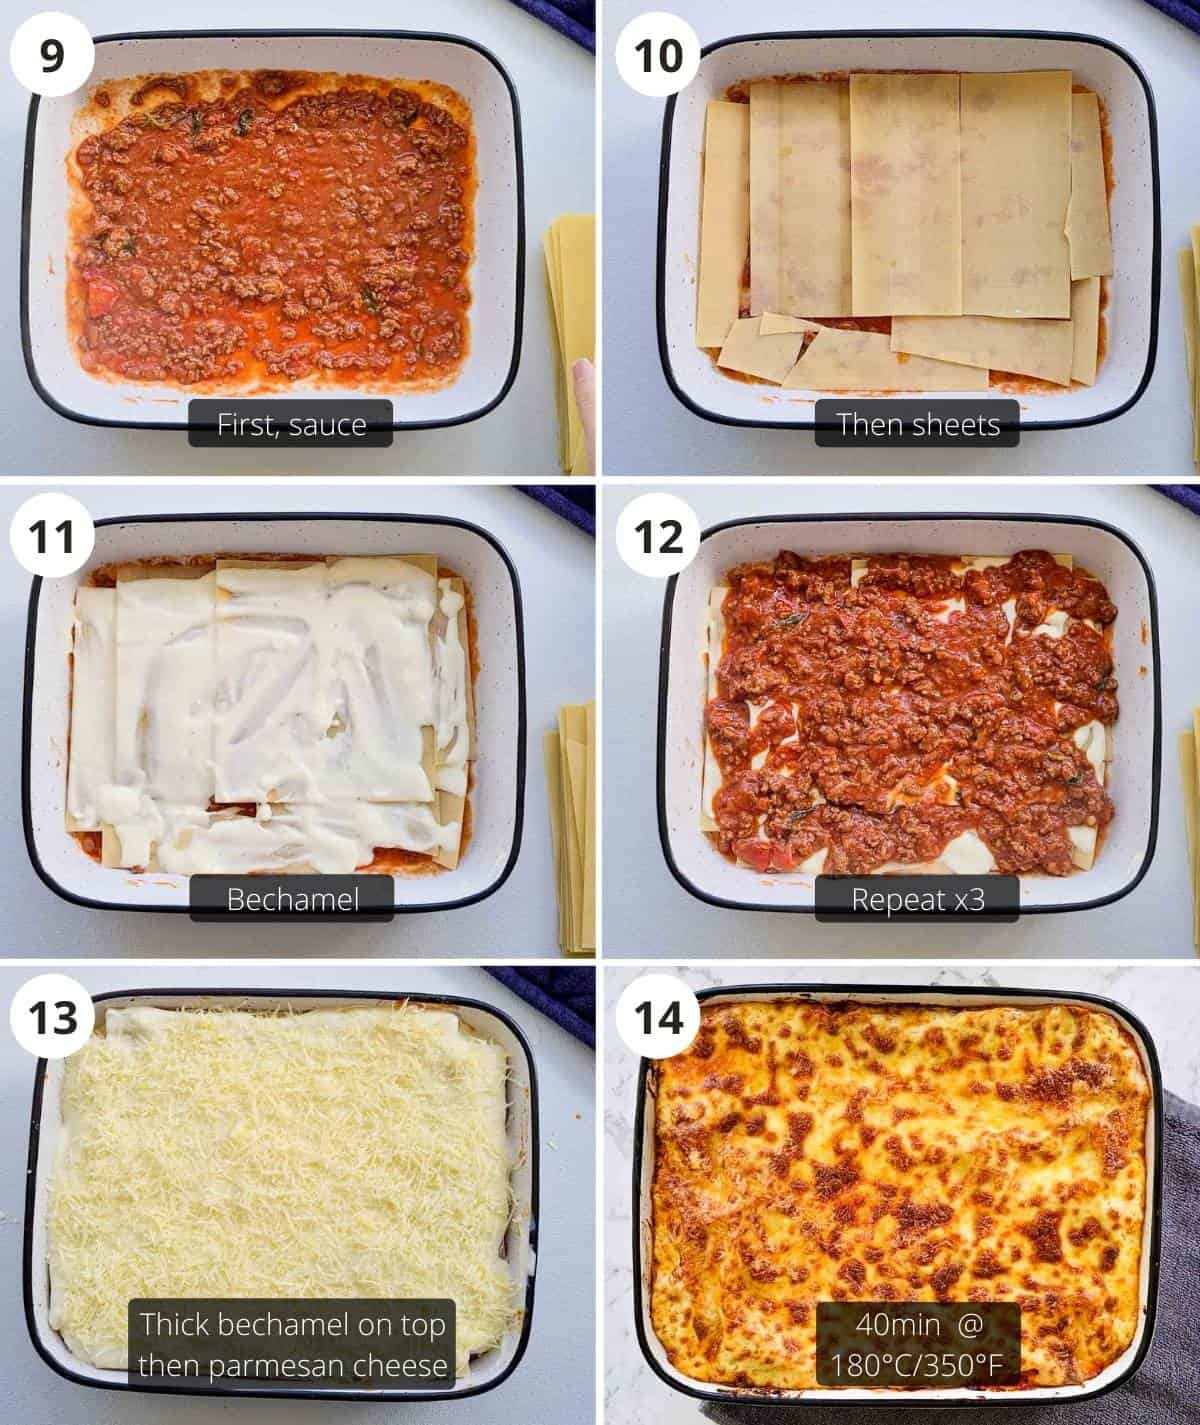 Step by step instructions for assembling and baking the lasagna to golden